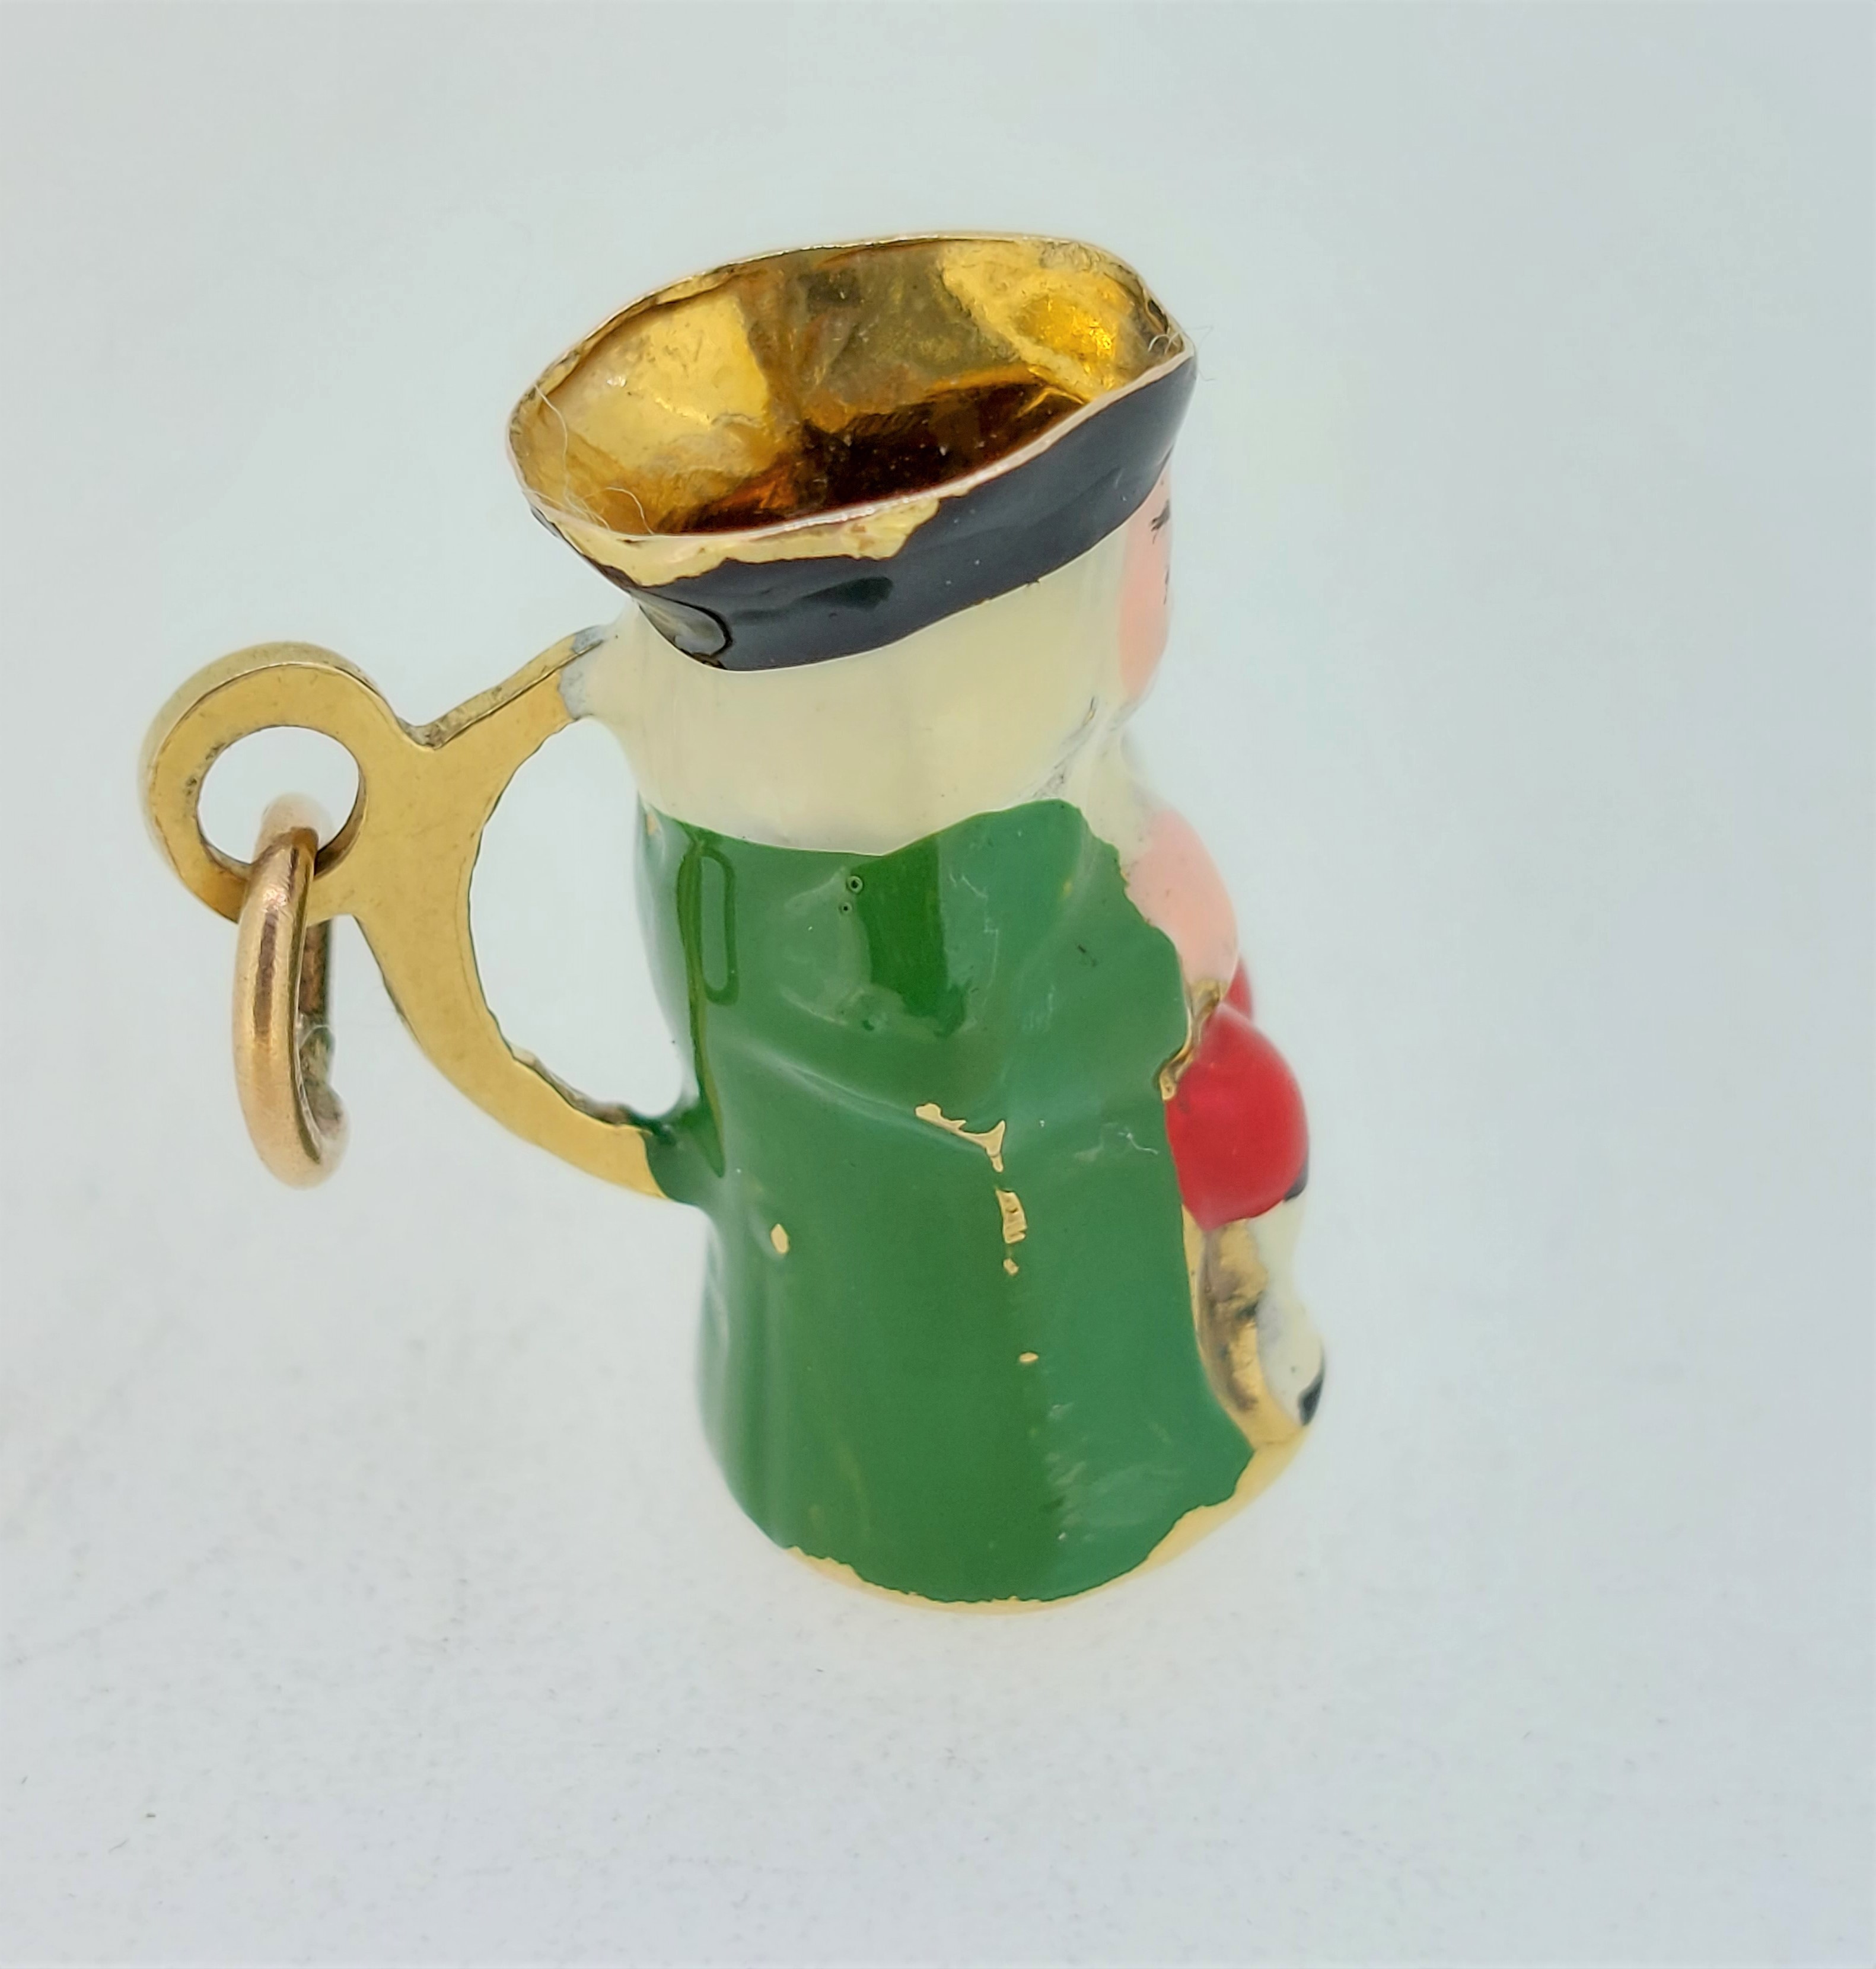 9ct Yellow Gold (375) Enamelled Toby Jug Charm Pendant - Image 2 of 8